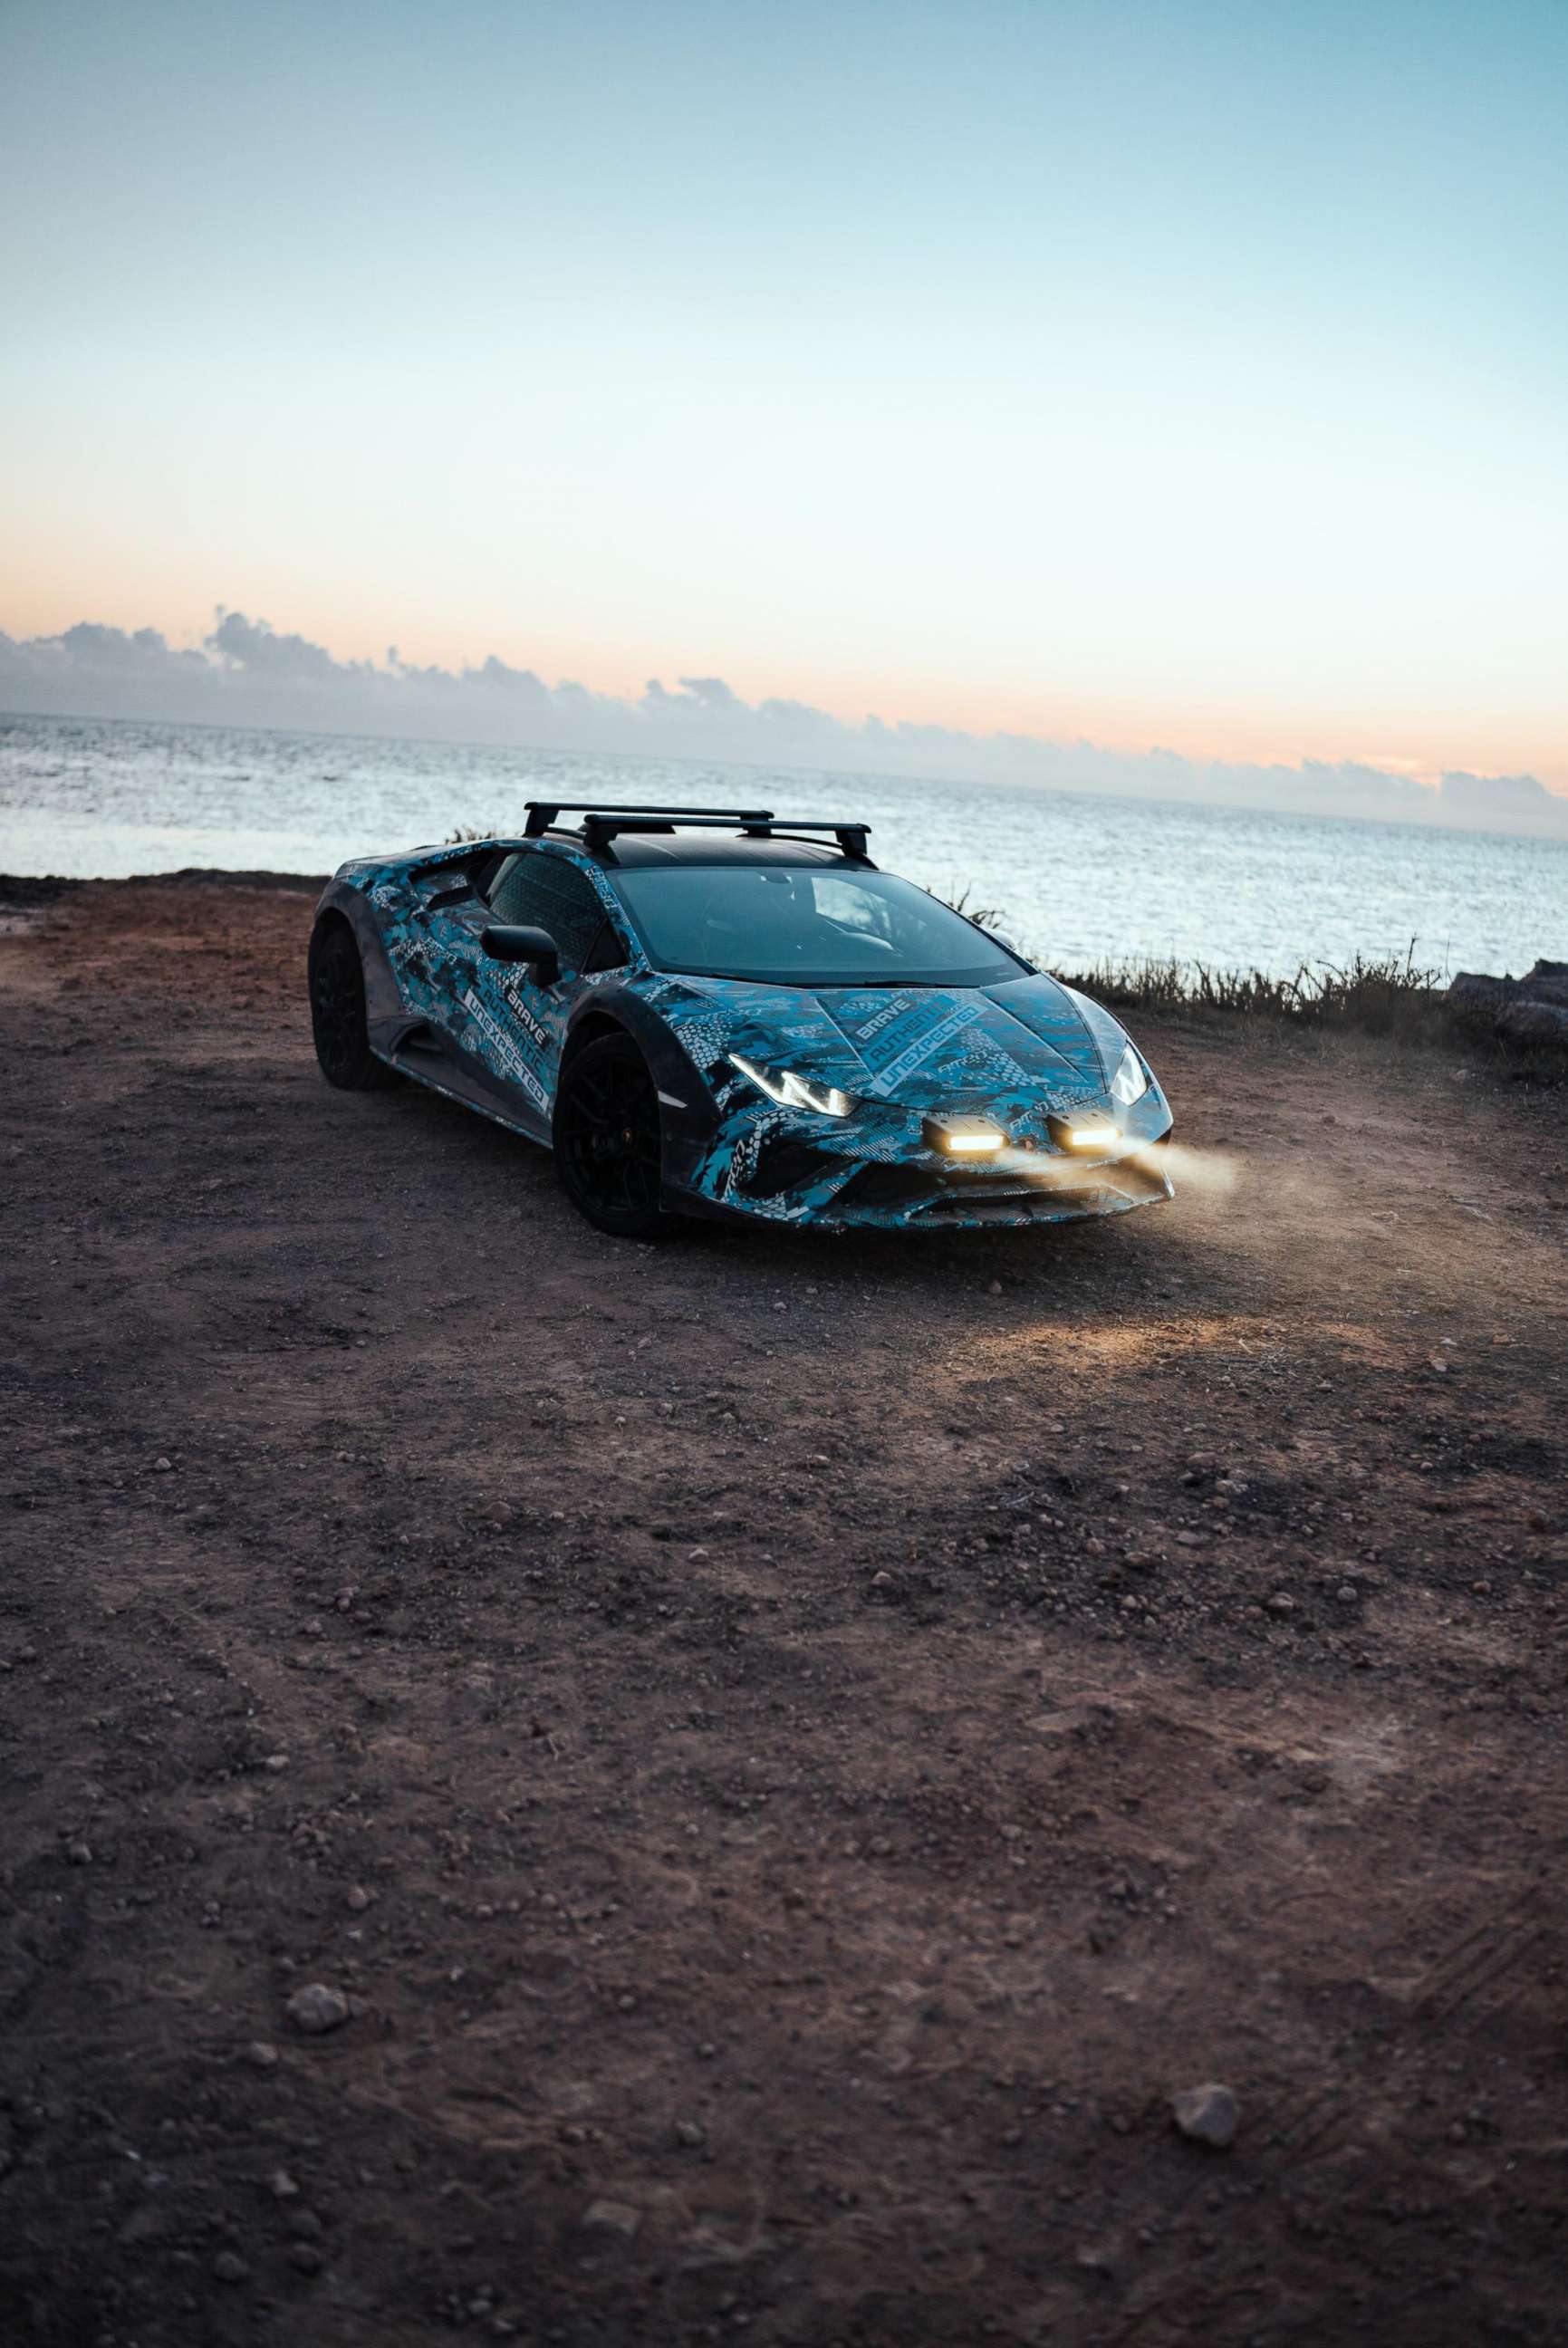 PHOTO: Lamborghini will reveal an all-terrain Huracan, named the Sterrato, at Art Basel in Miami this year.